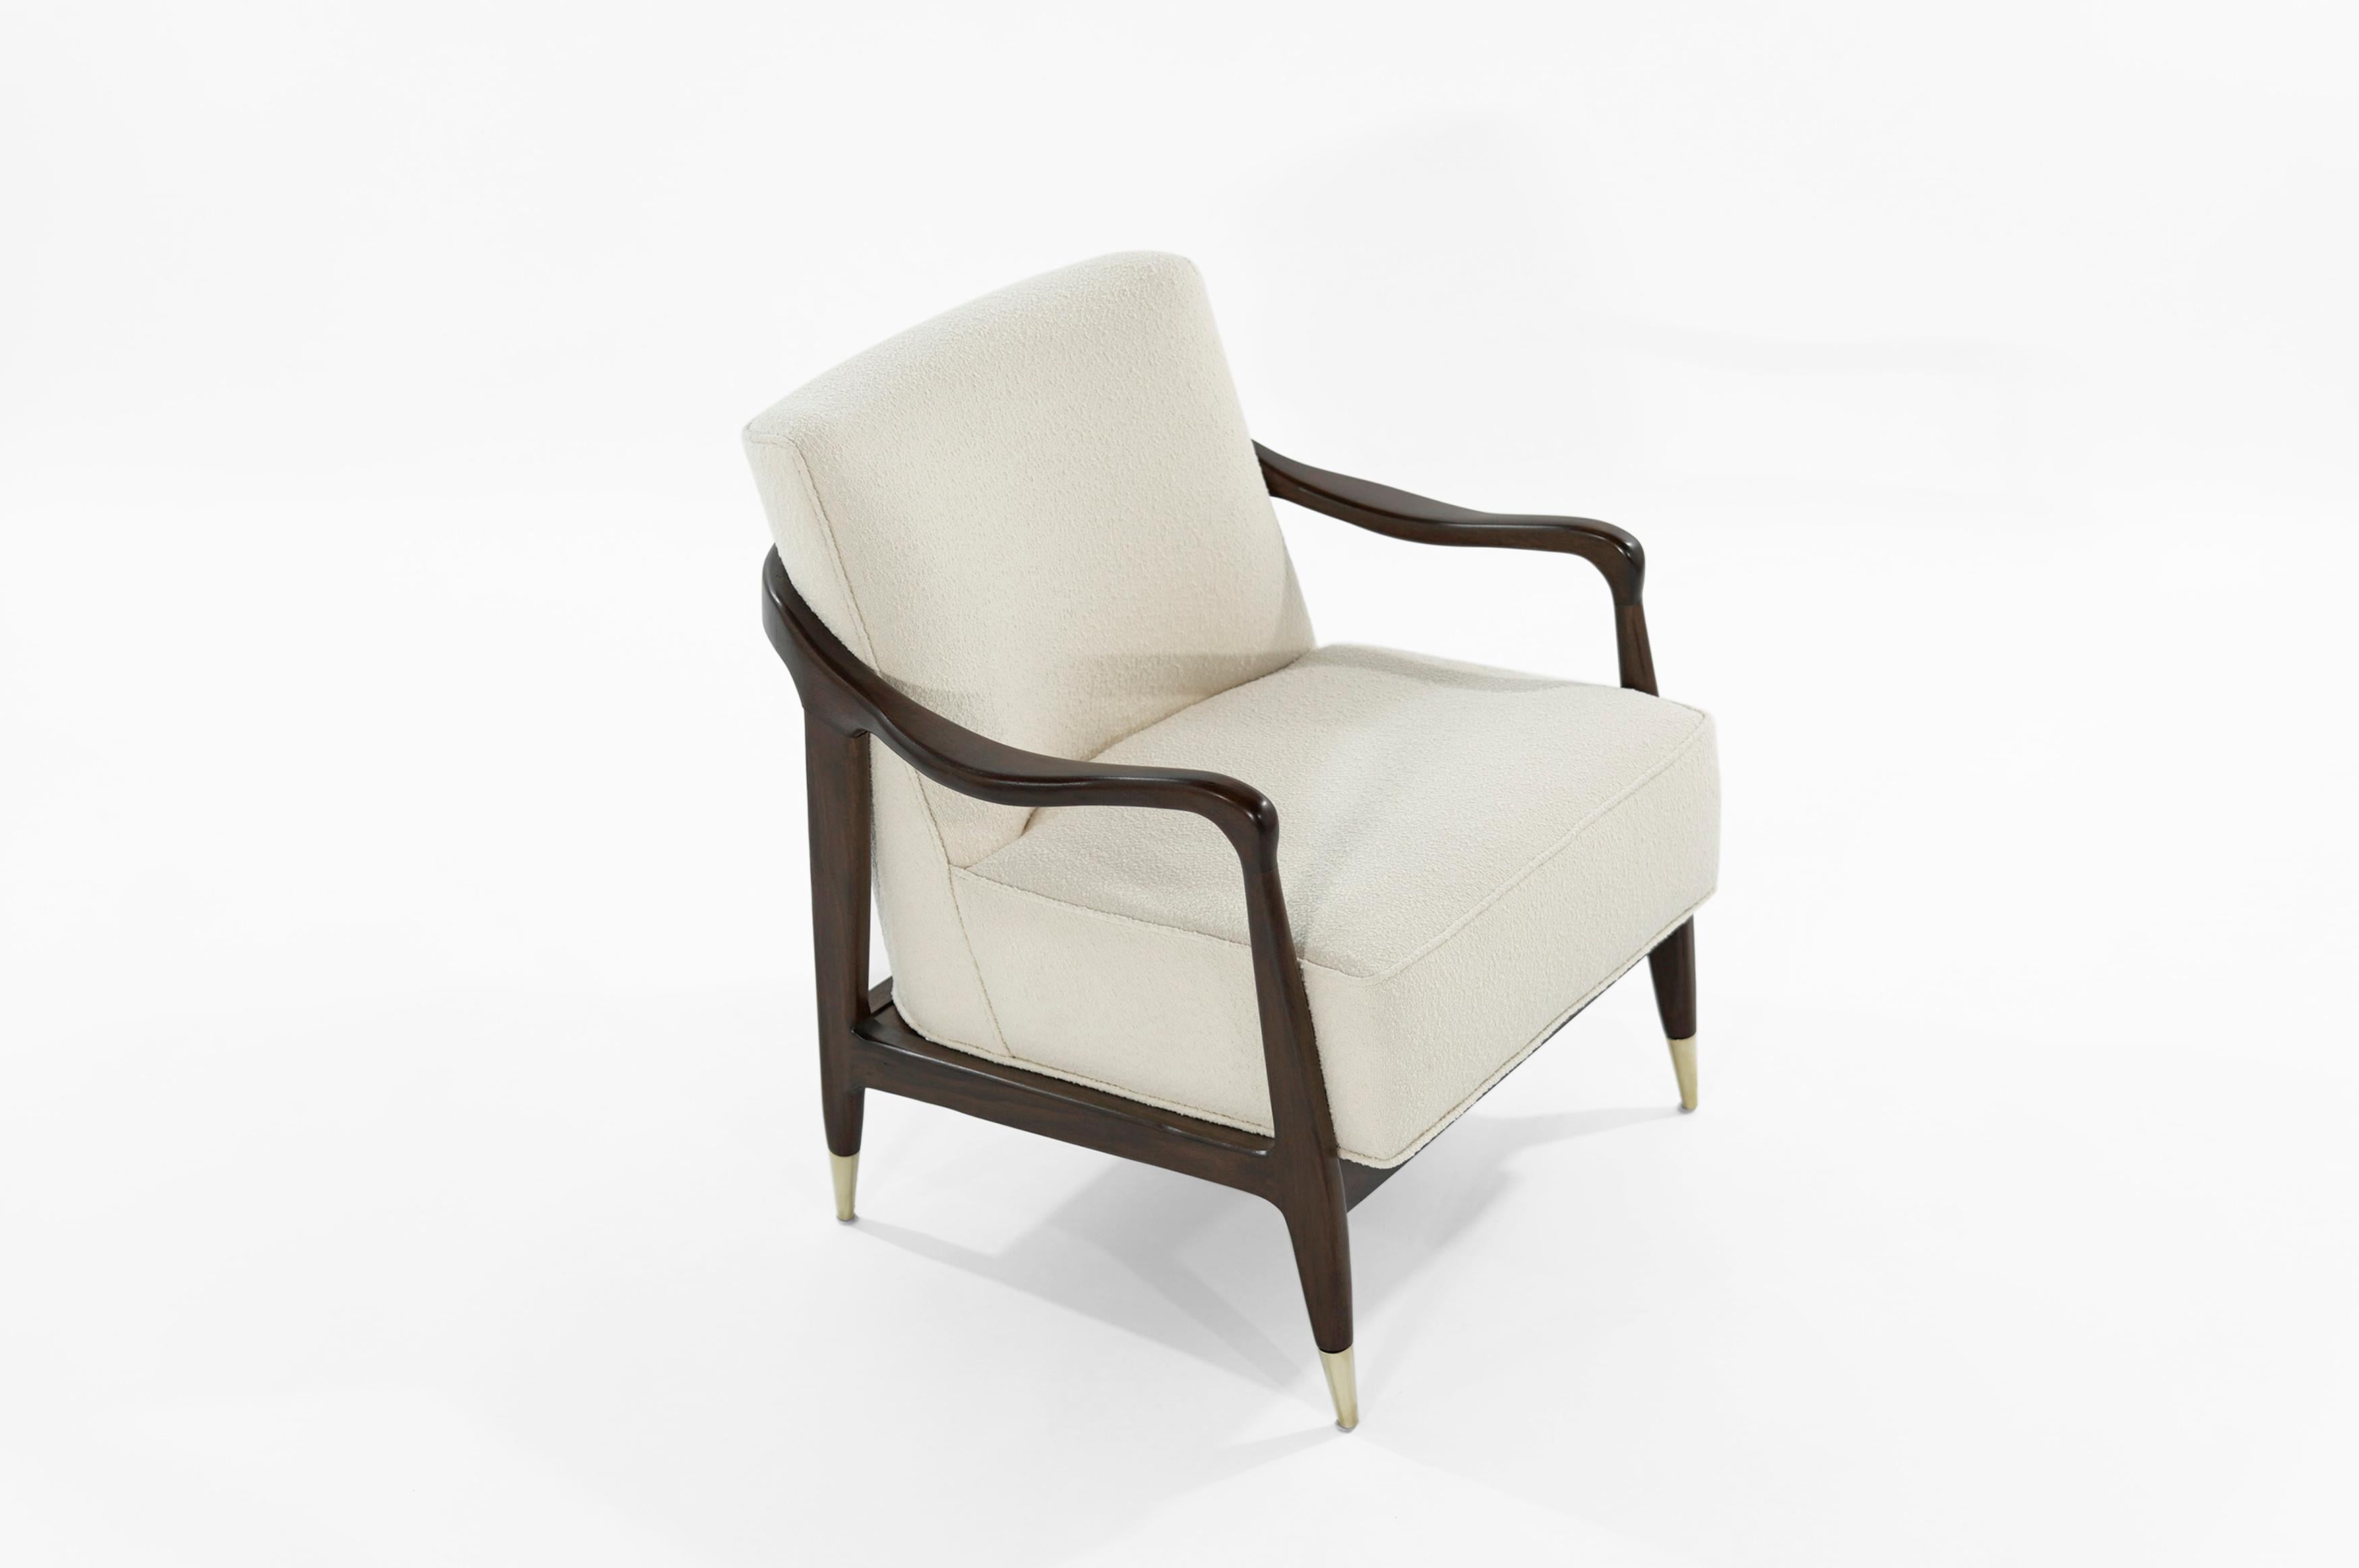 Exquisite Mid-Century Modern lounge chair featuring sculptural walnut frame, which has been expertly restored to their original integrity. It boast new handcut high grade foam, as well as hand polished brass sabots. Newly upholstered in cream